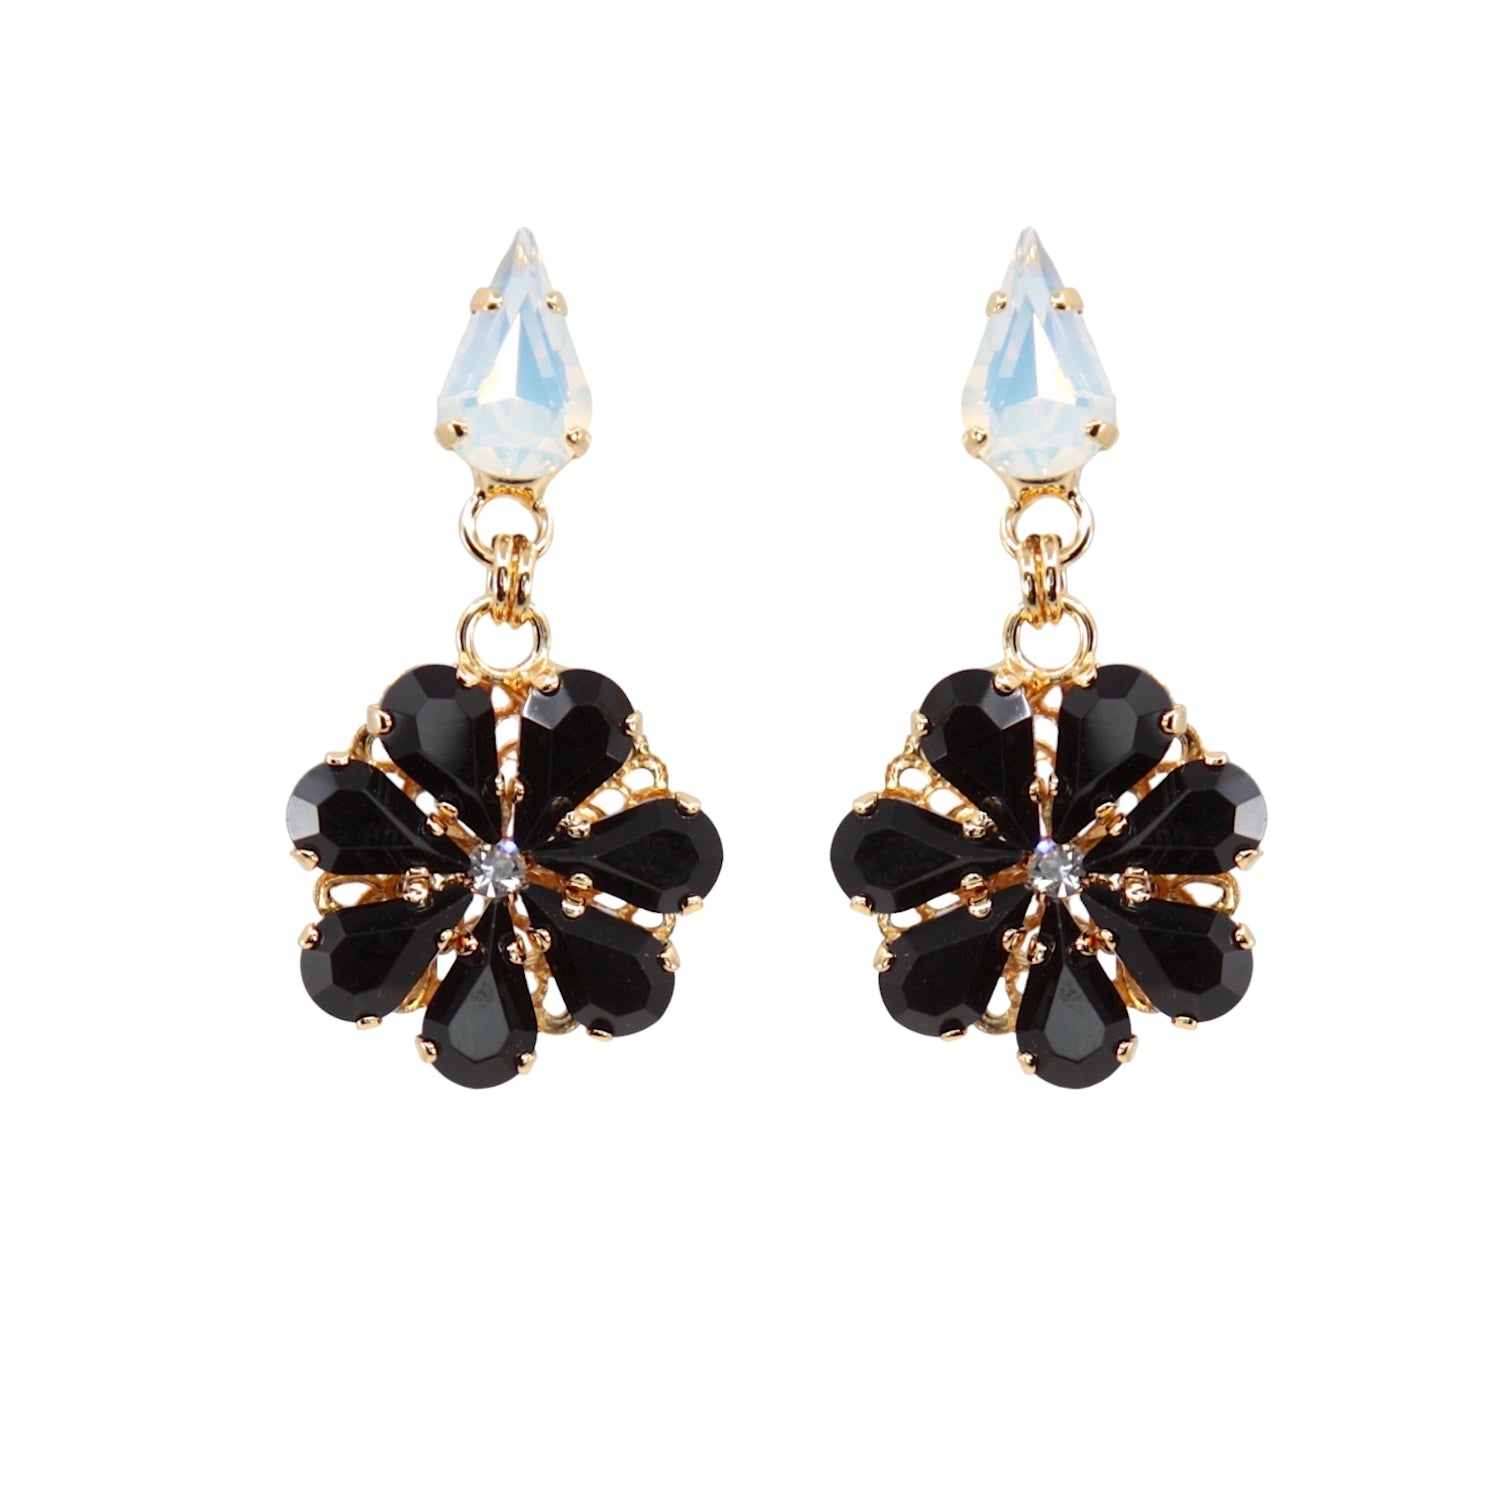 Daisy Pendant Earrings With Crystal Drops In Onyx And Opal Shades.